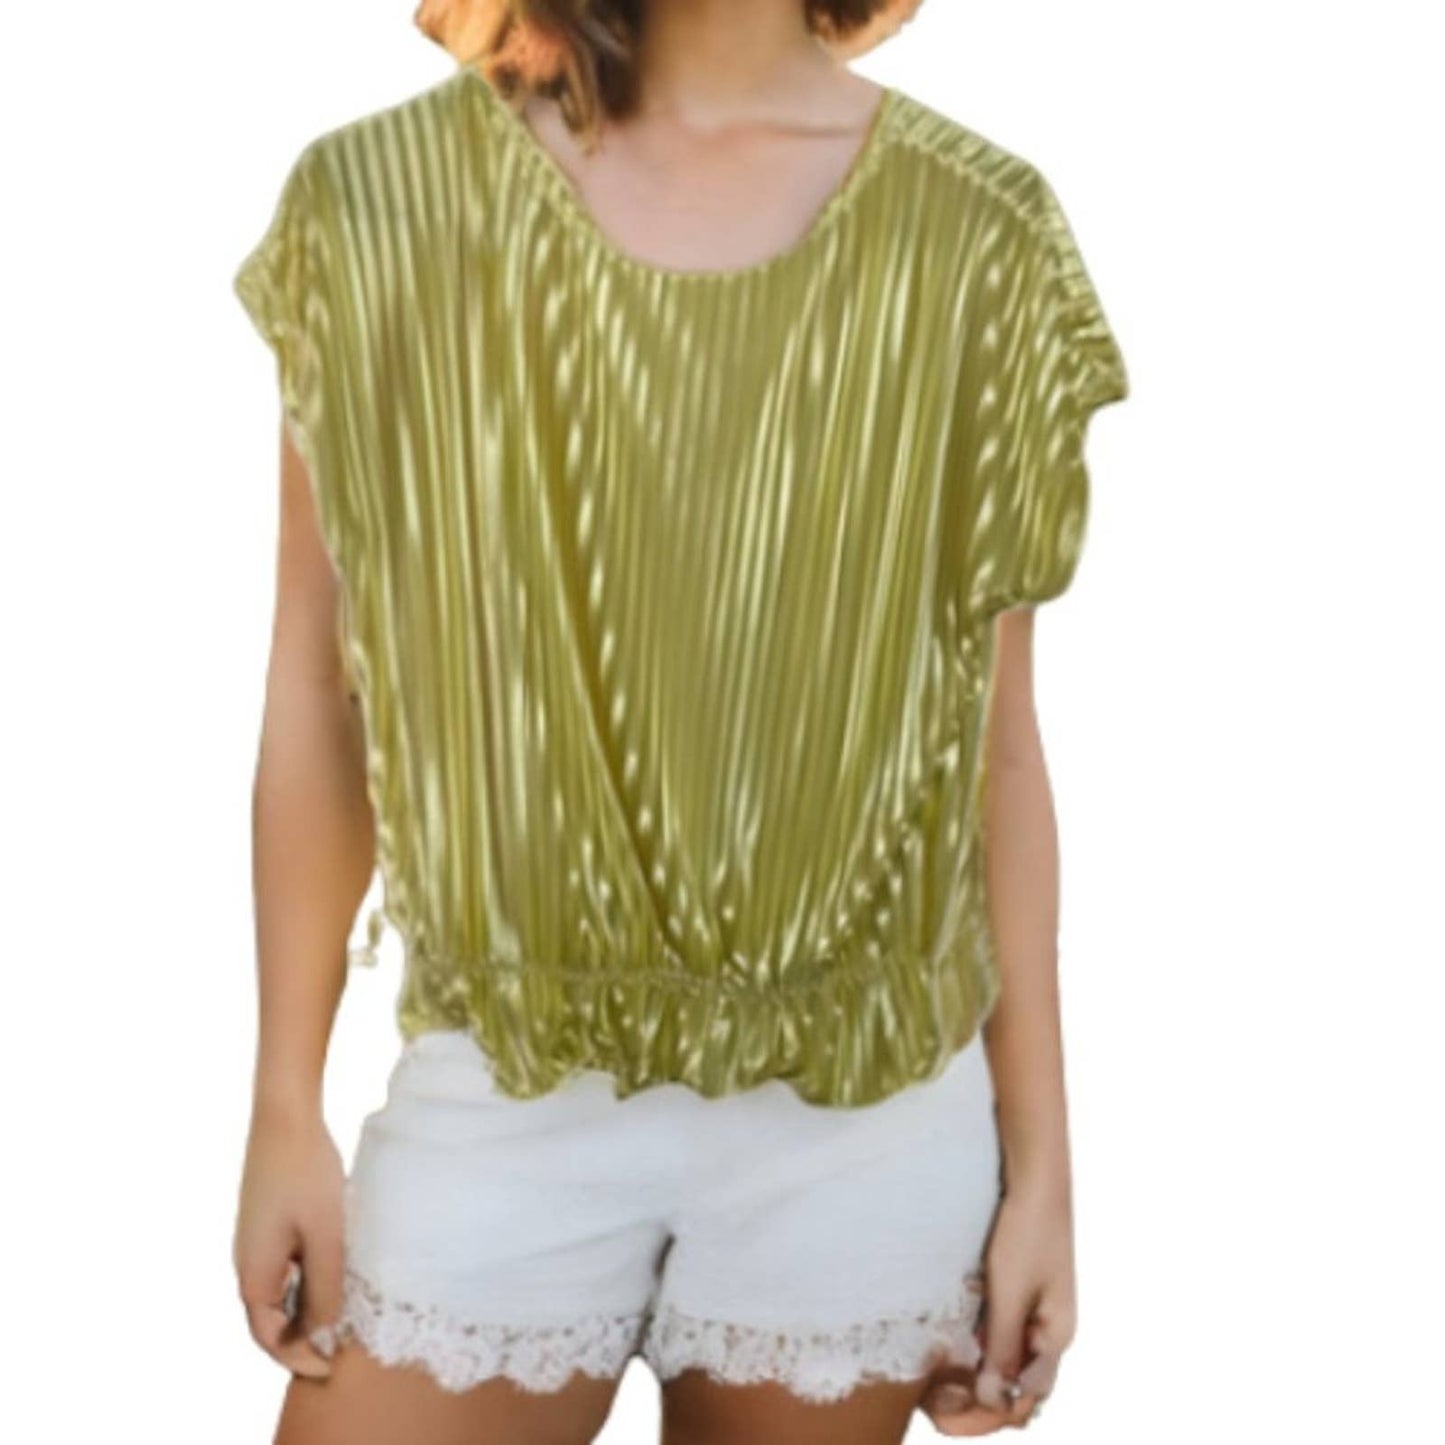 Zara Pleated Boat Neck Blouse with Peplum NWT Size Small